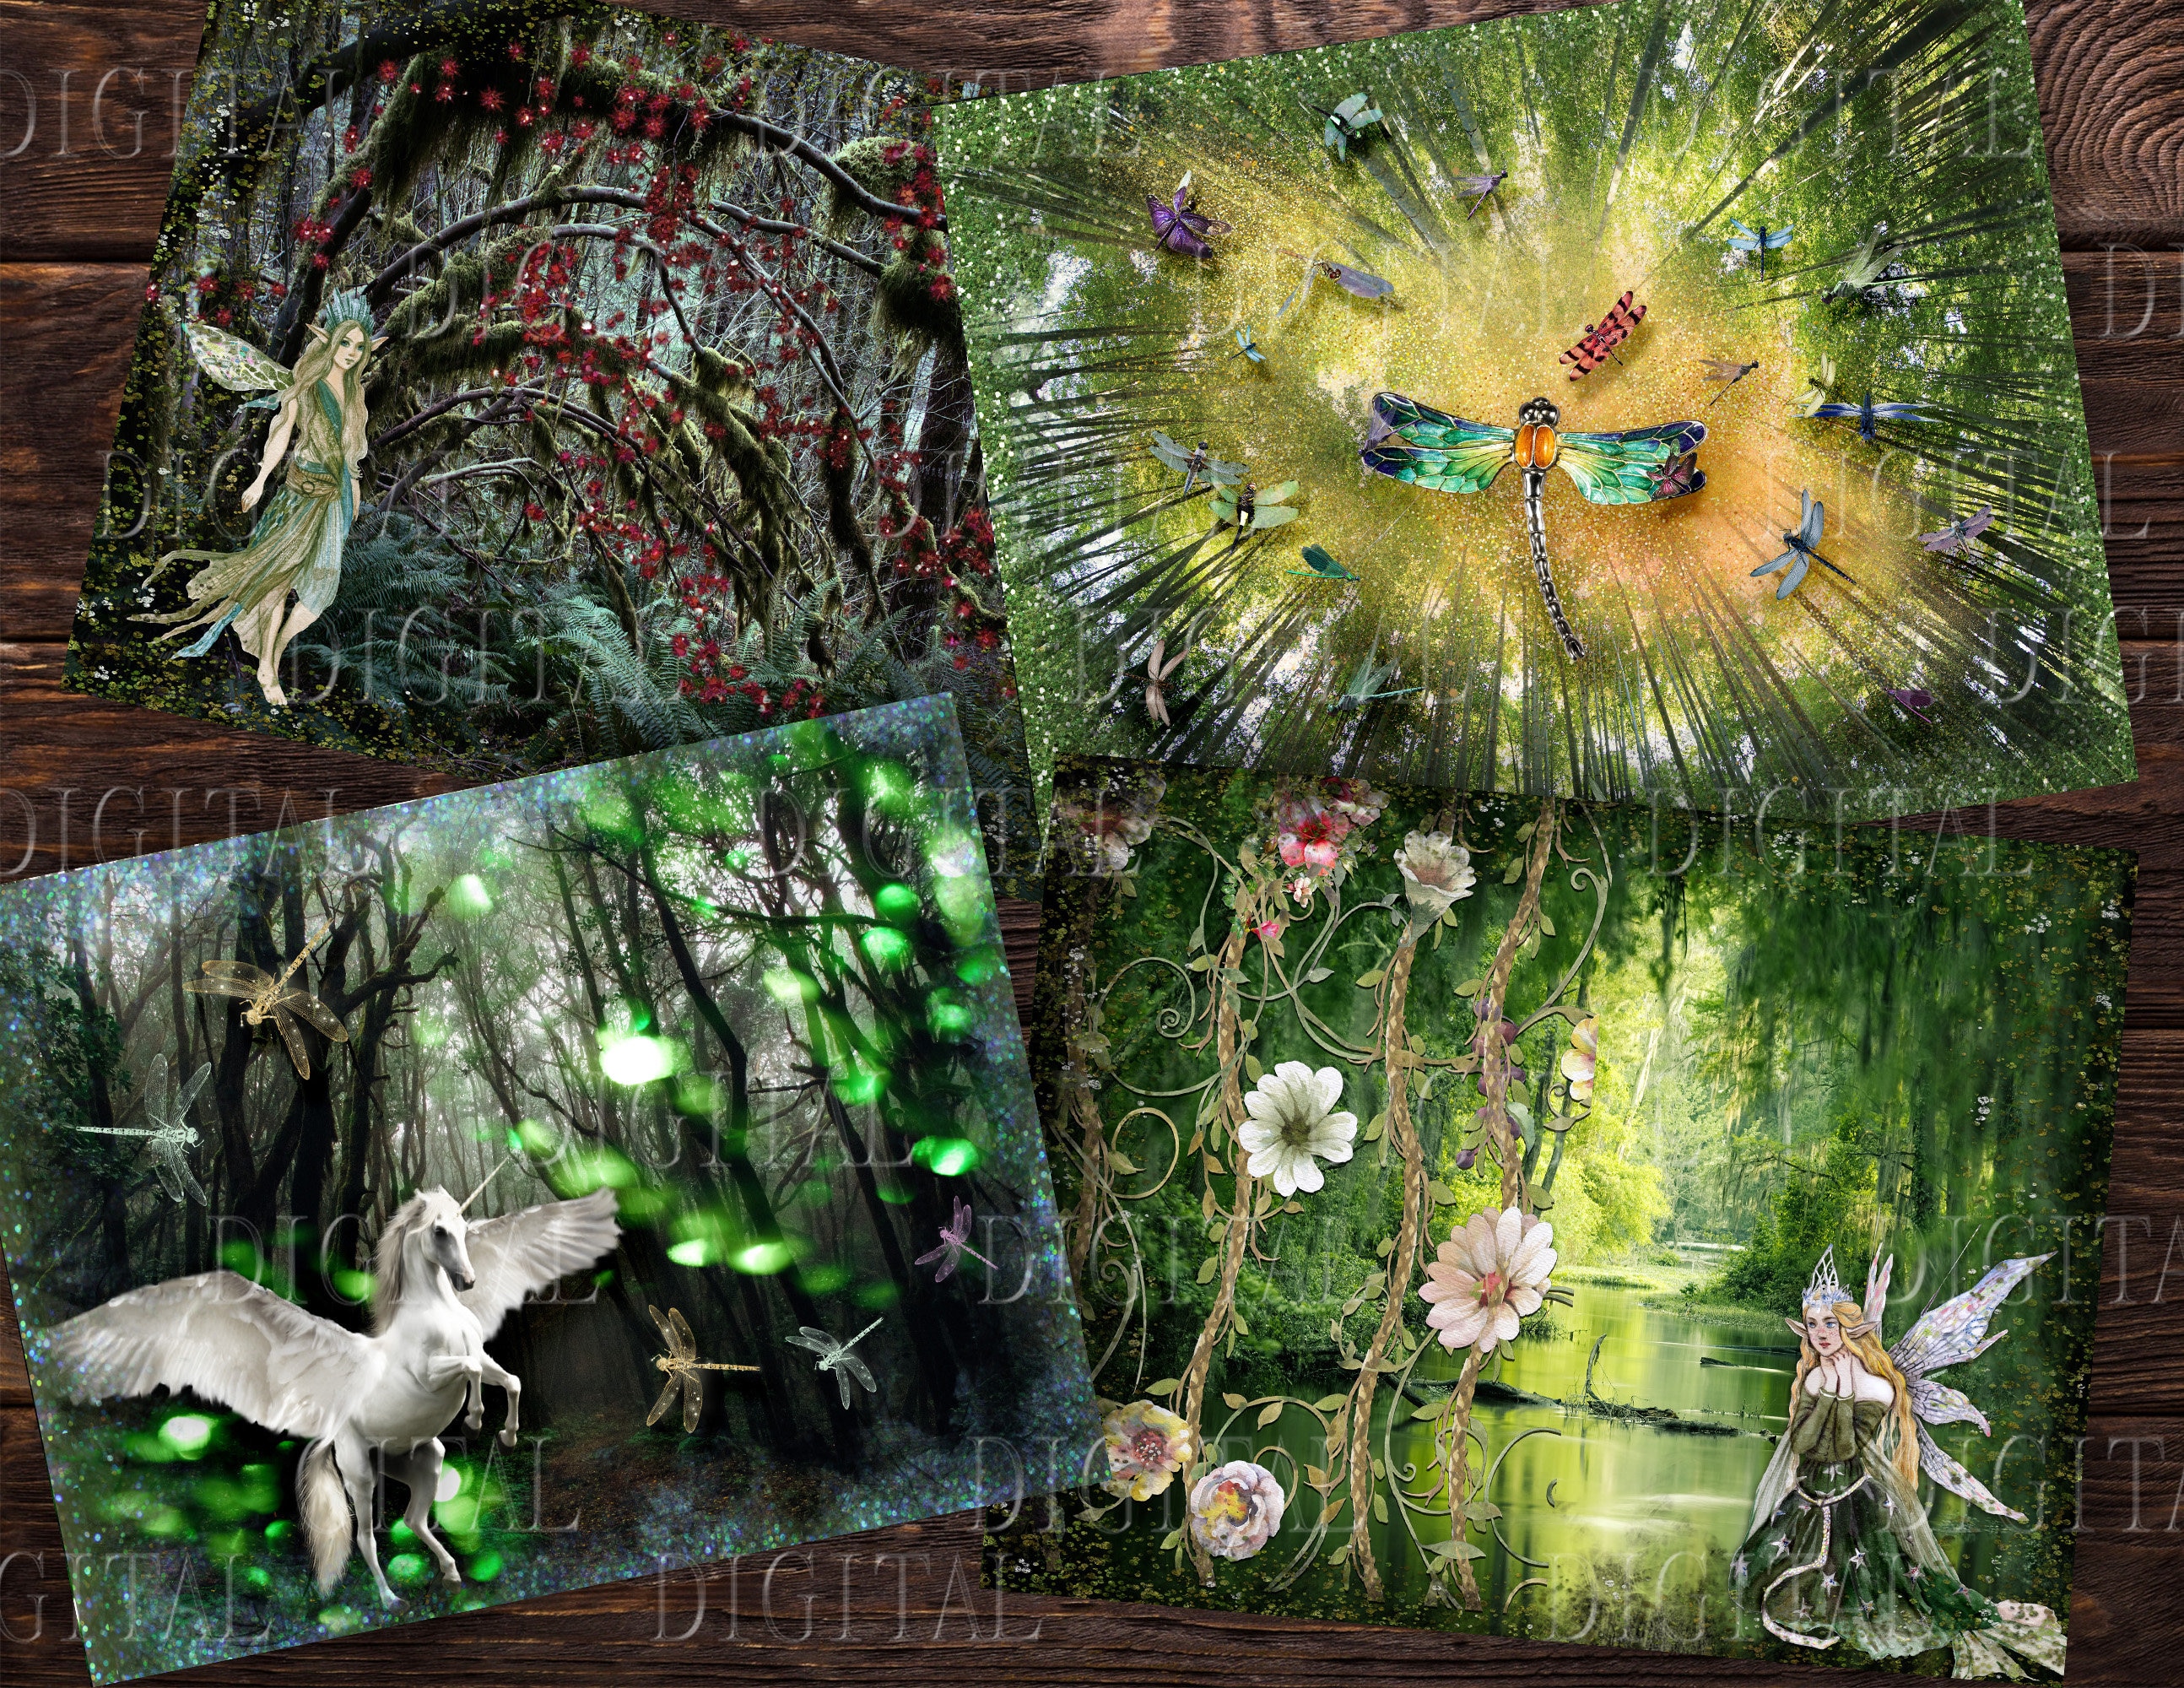 Magical Forest Fairies Feature Wall Art Mural Wall Paper Self Adhesive  Vinyl